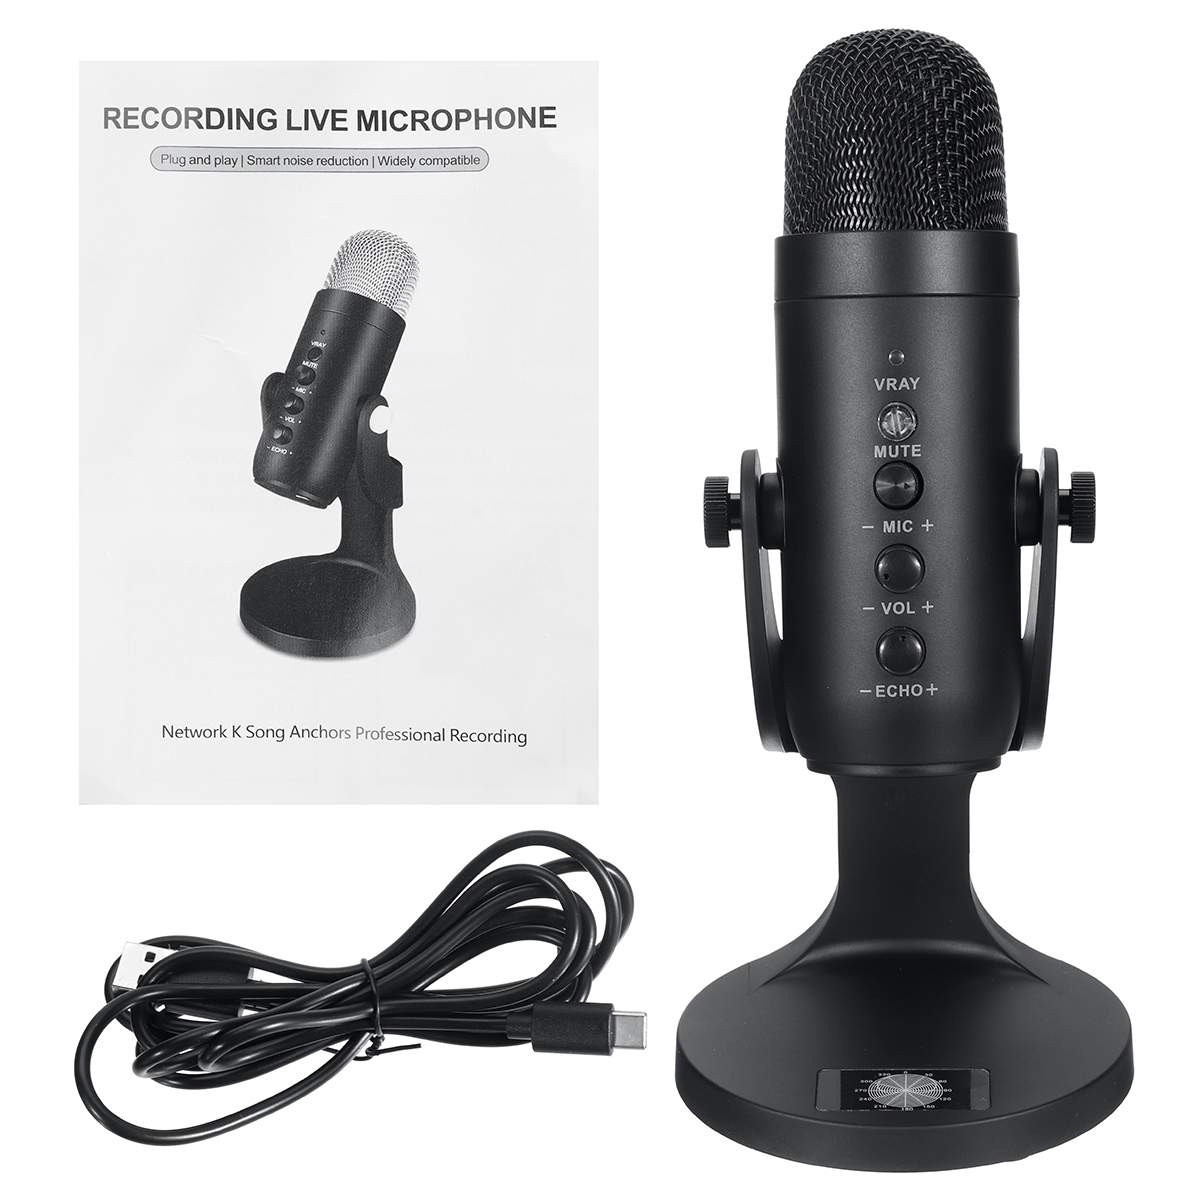 LEORY MU-900 USB Condenser Microphone Stand Gaming Streaming Podcasting Recording for Computer USB PC Headphone